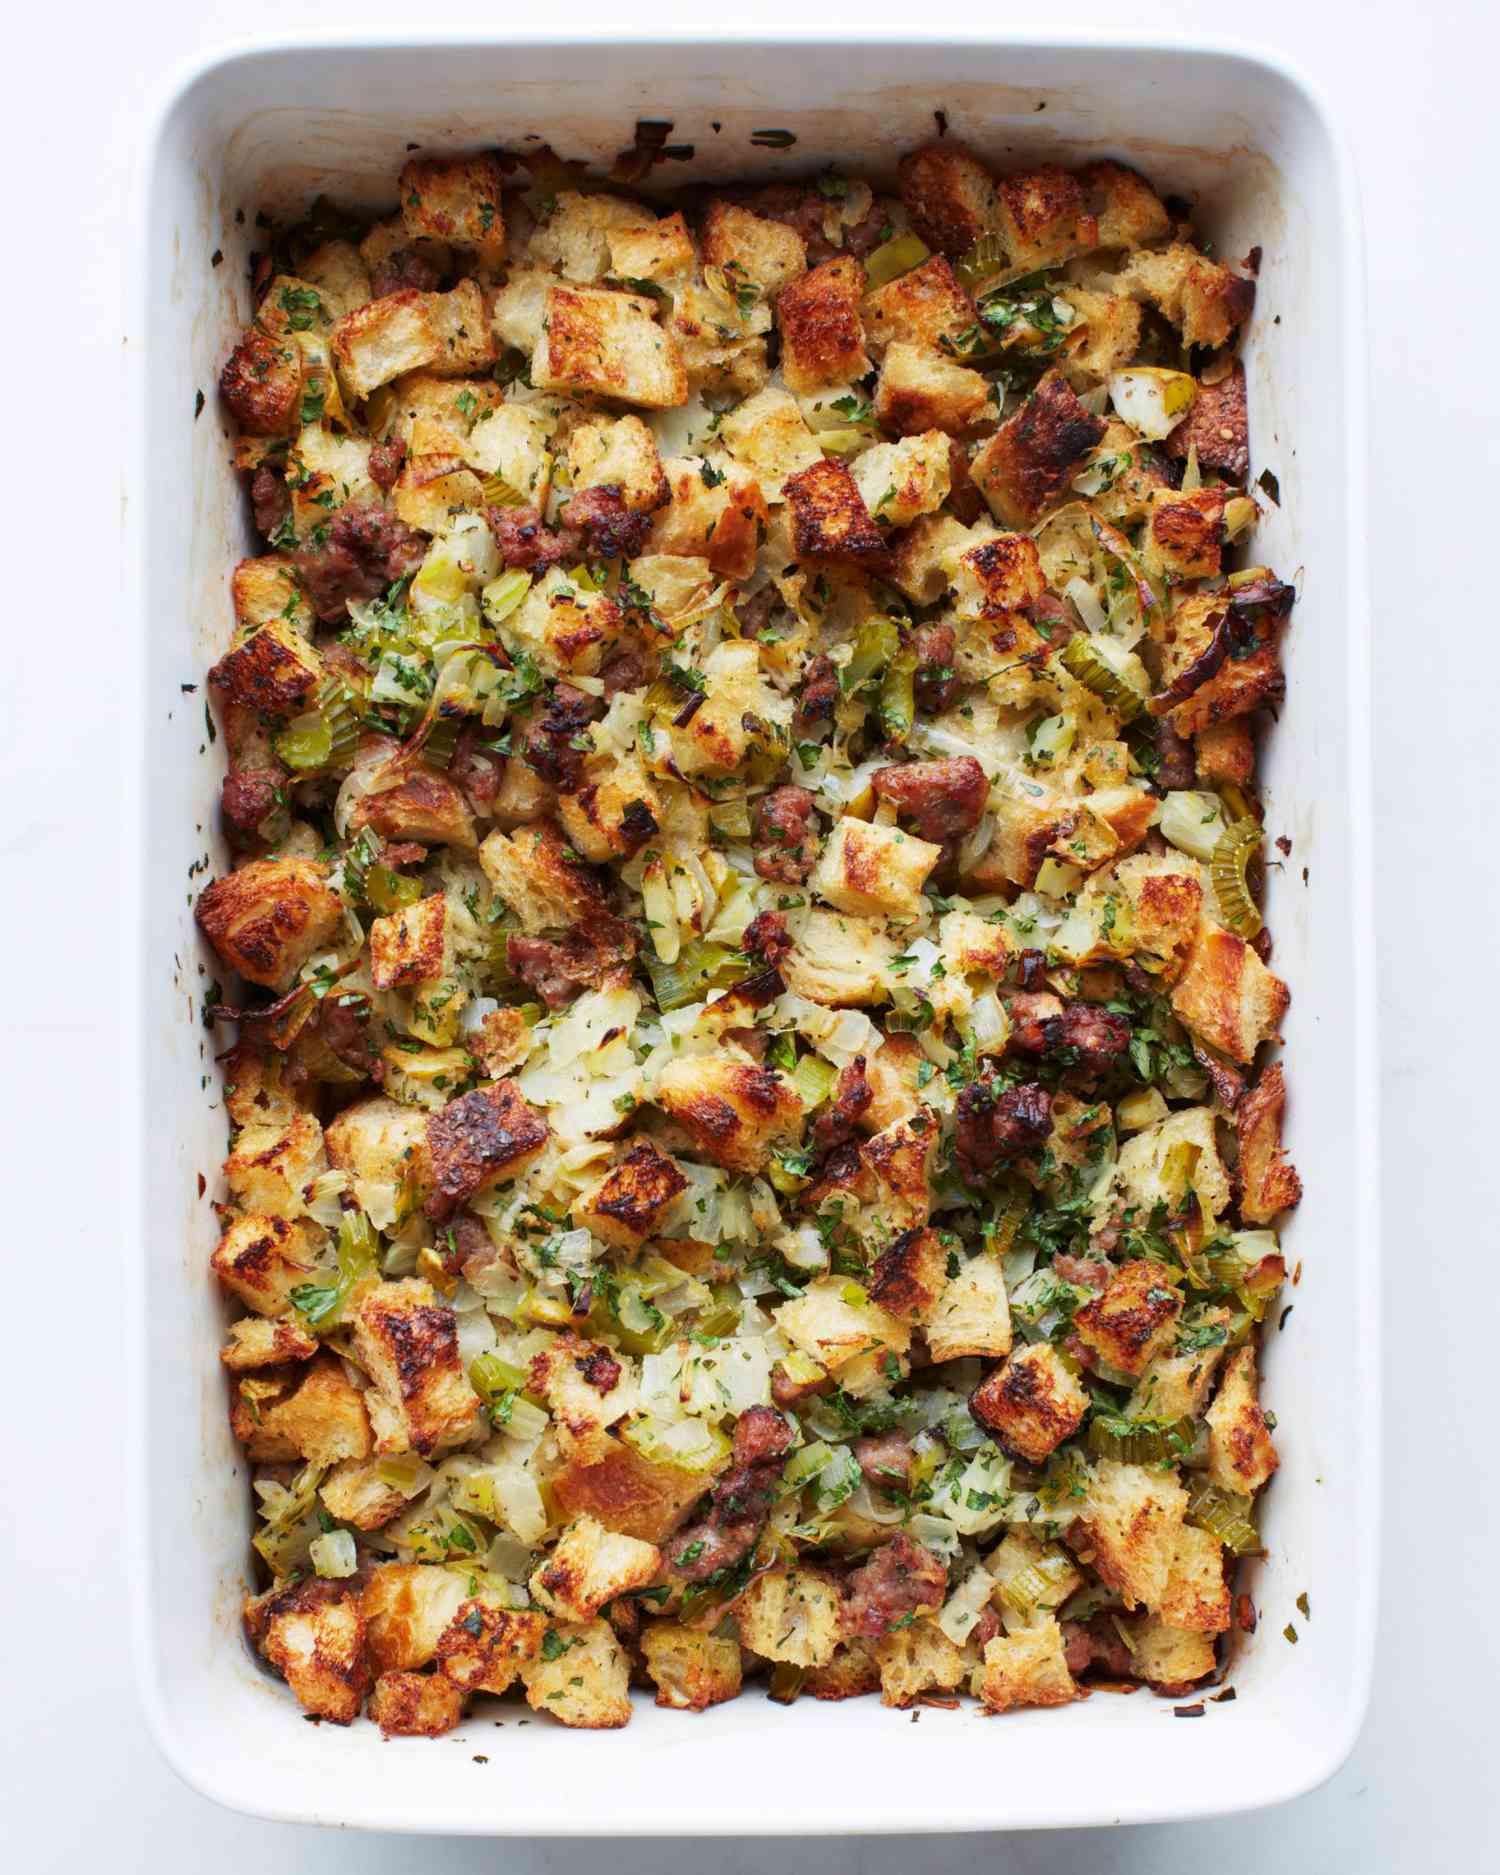 What's the Secret to Making Great Stuffing?